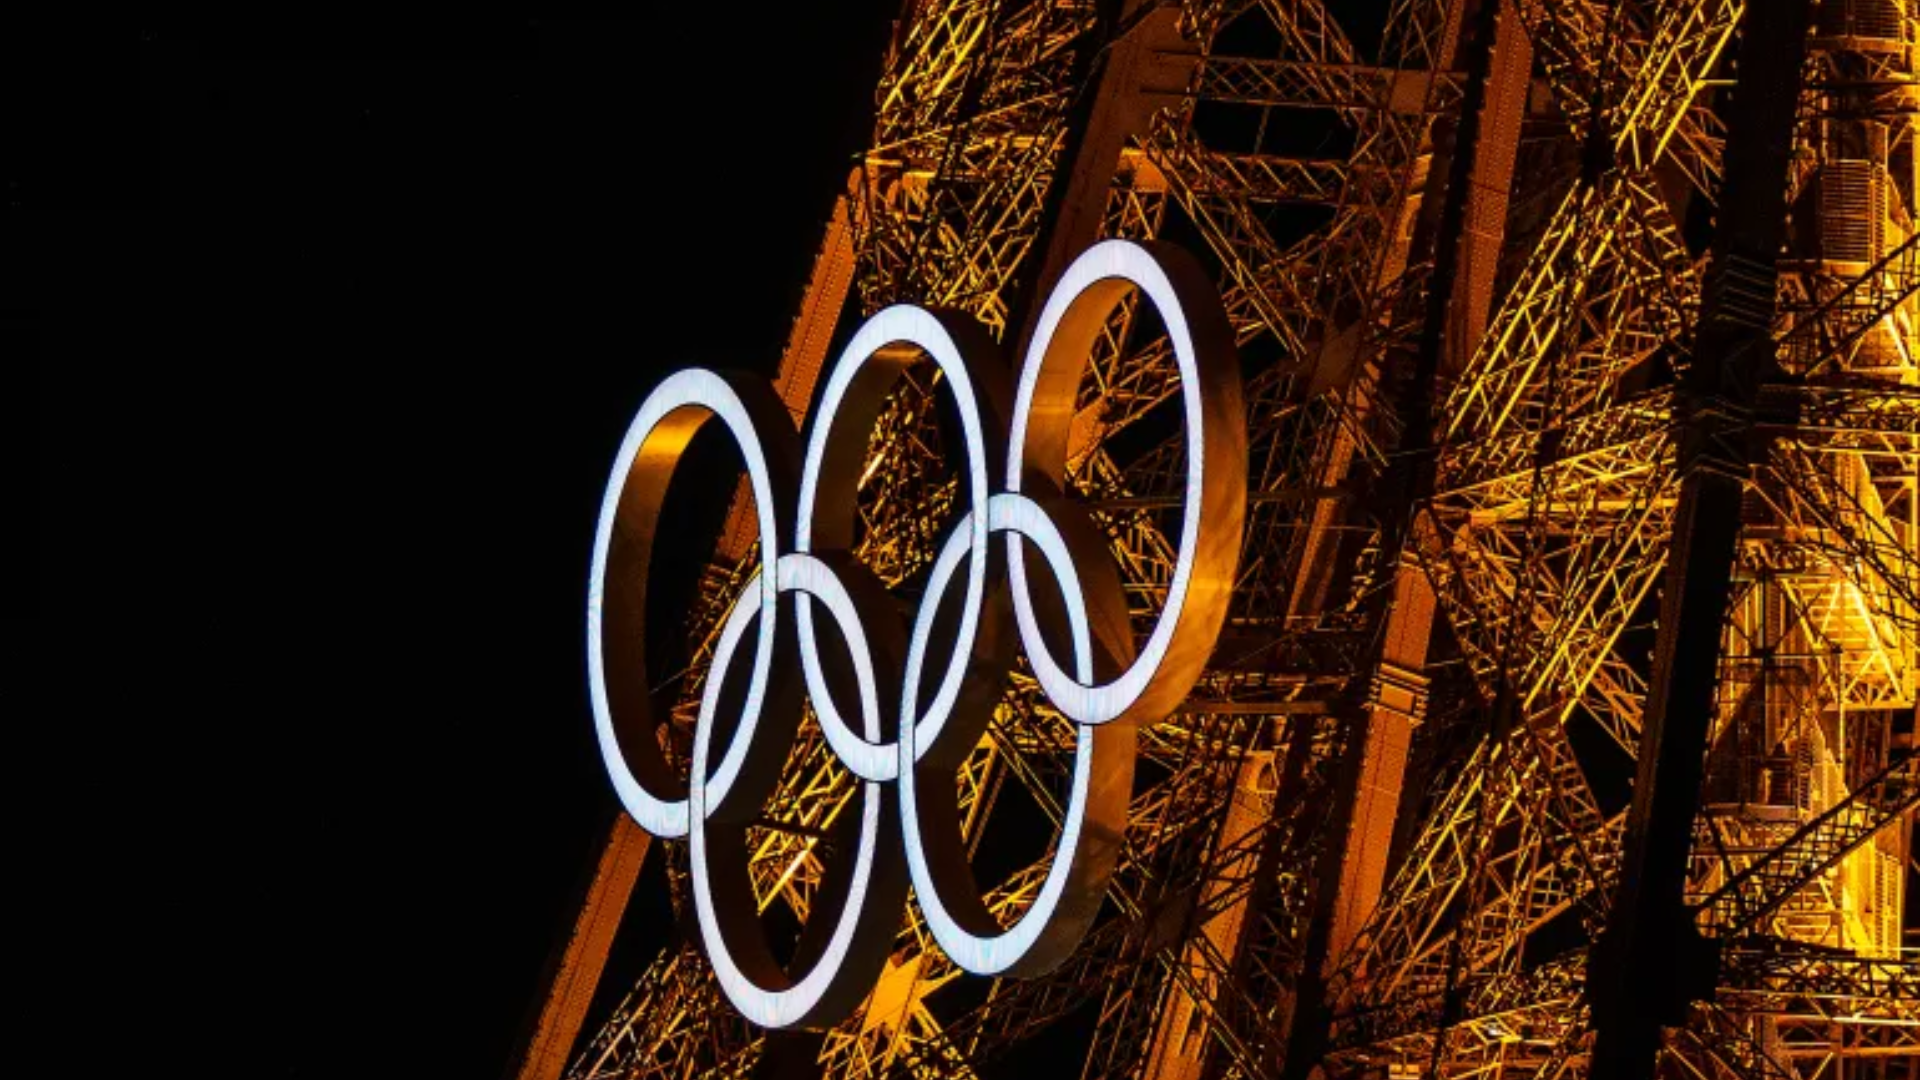 Paris 2024 Olympics: Everything You Need To Know About The Historic Opening Ceremony